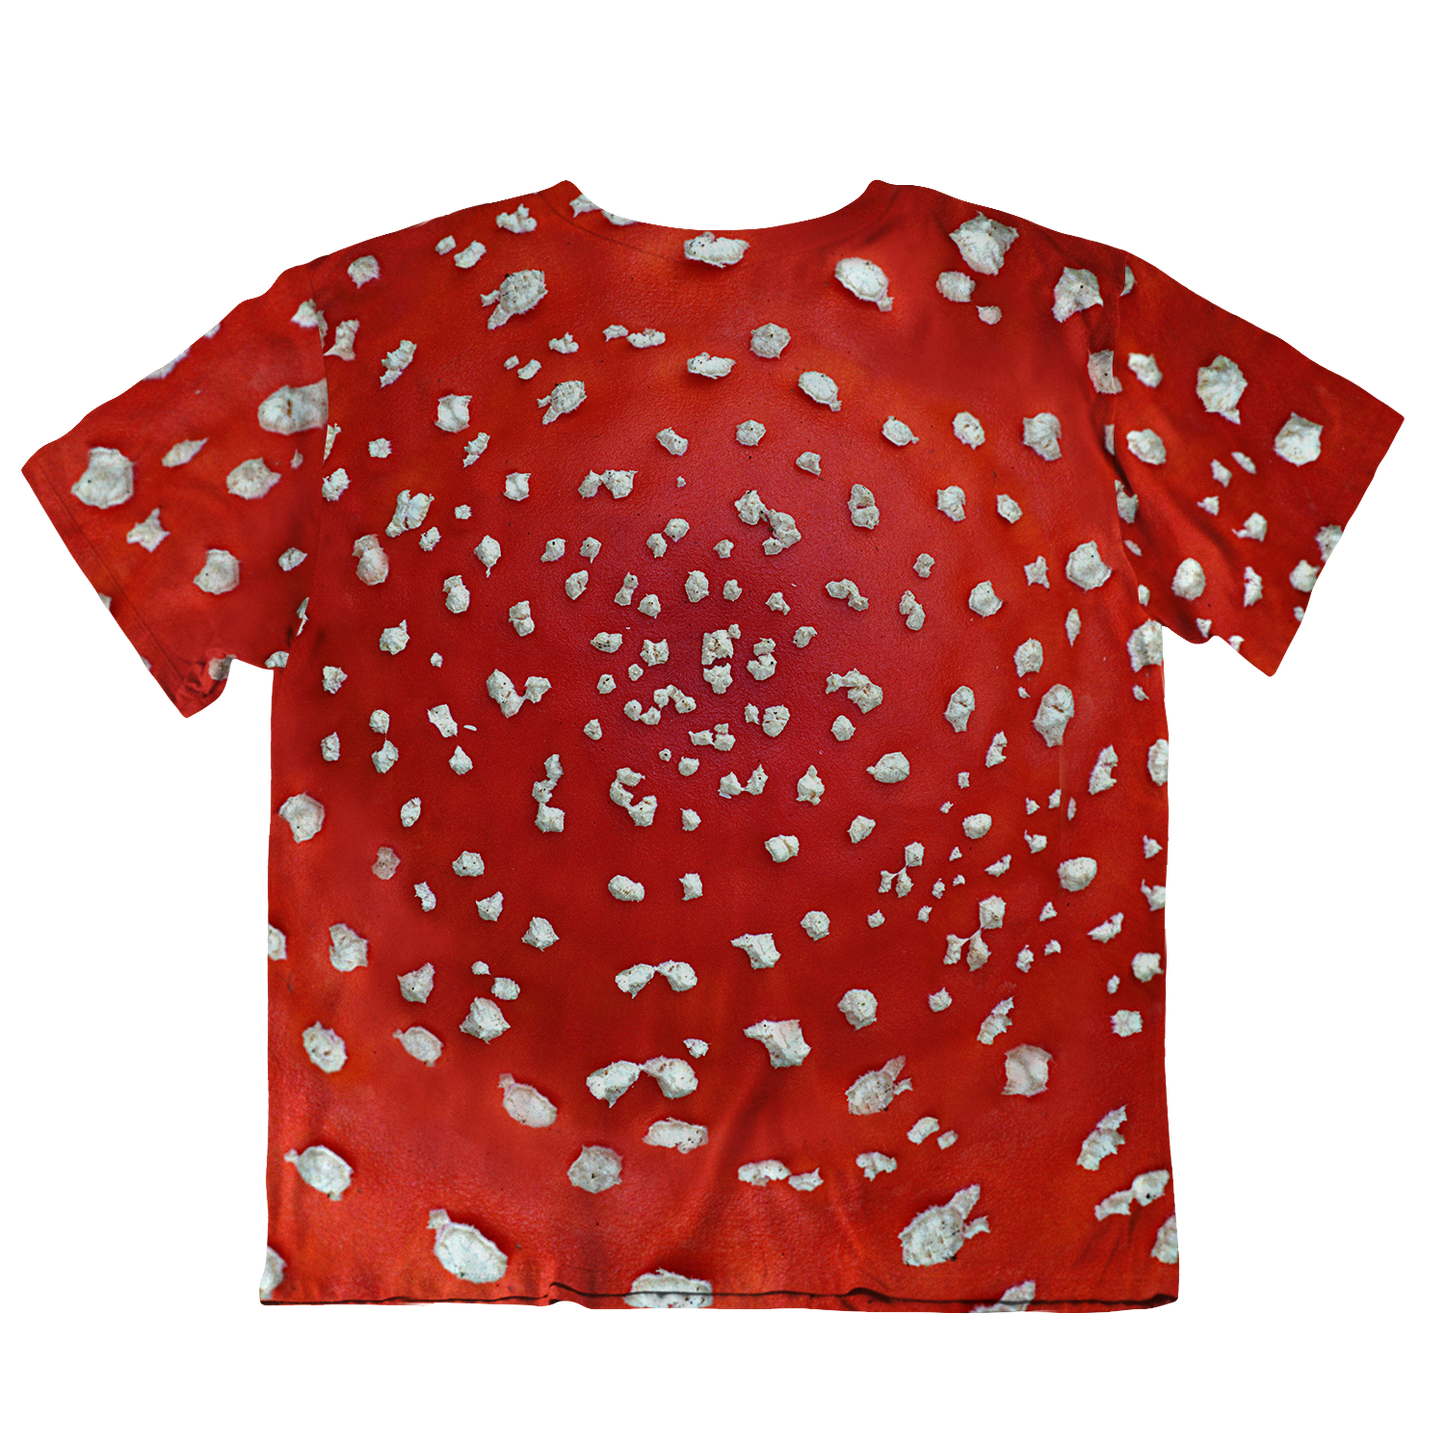 Fly Agaric - Amanita All Over Print Oversized Tee